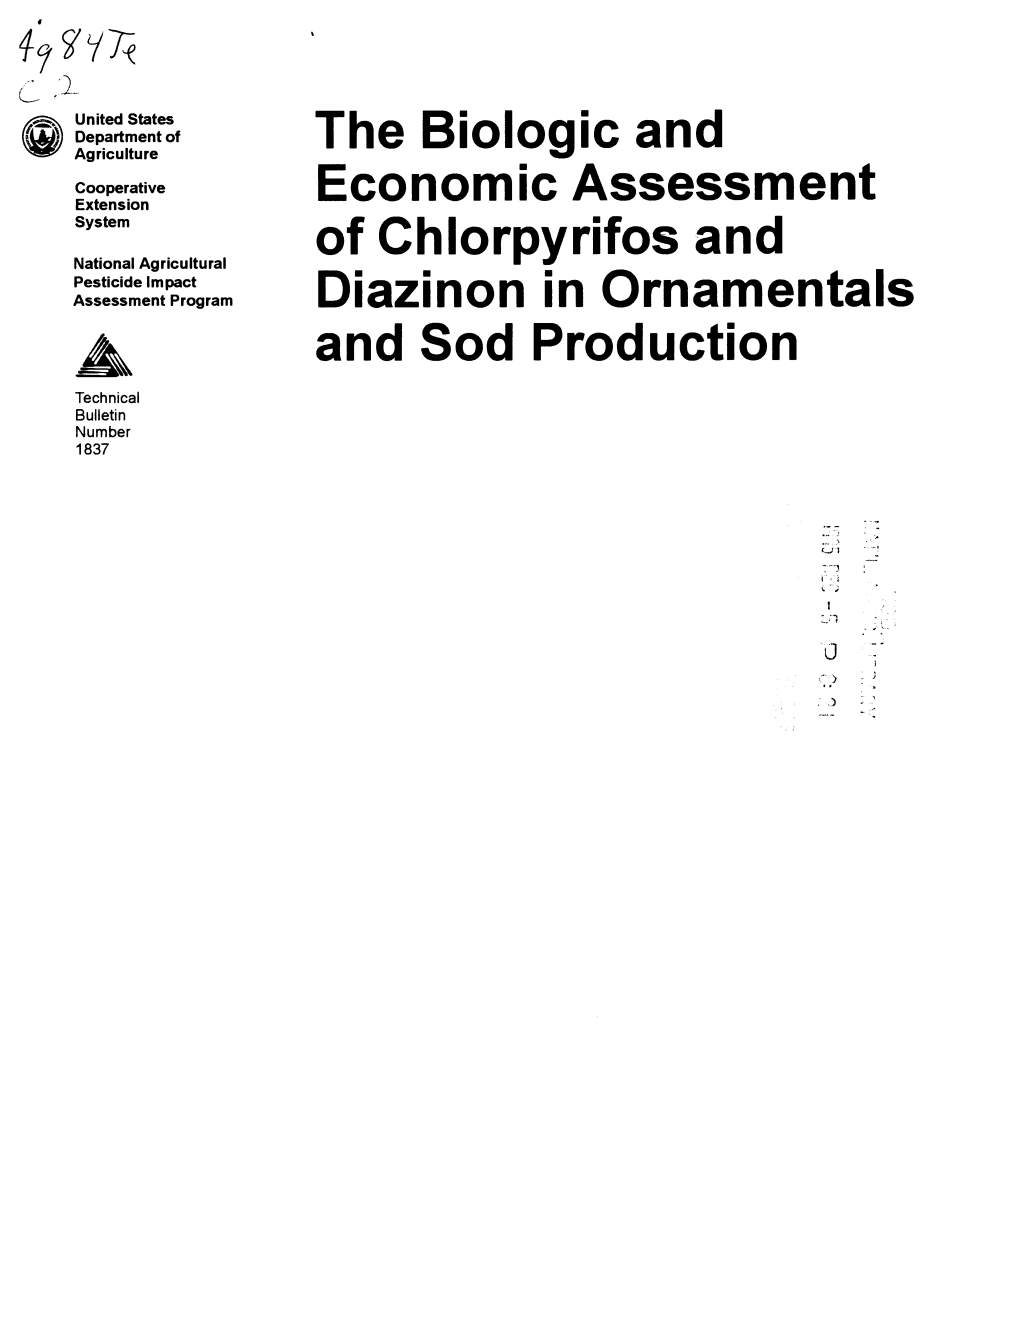 The Biologic and Economic Assessment of Chiorpyrifos And